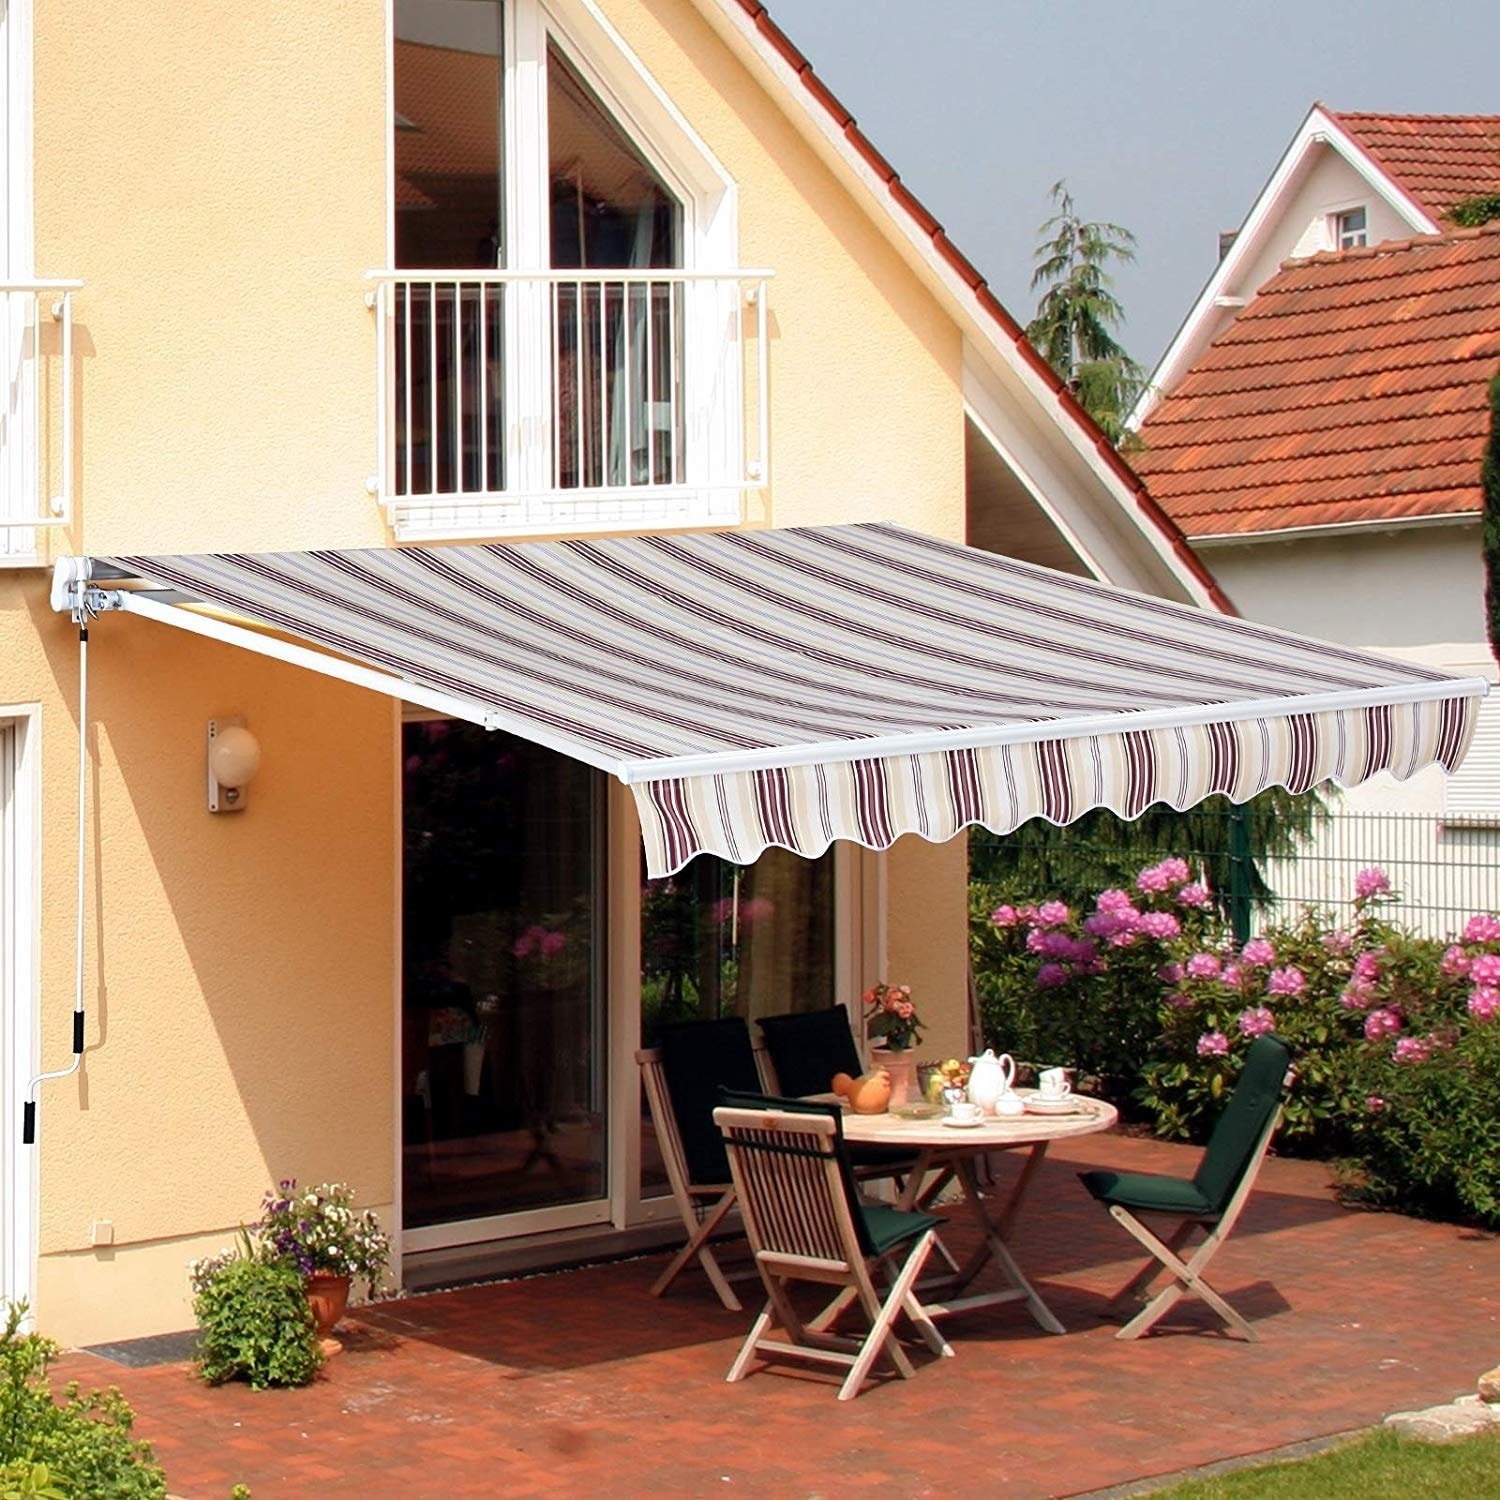 Details about   Retractable Patio Awning Outdoor Canopy Deck Cafe Sun Shade Shelter Manual Crank 